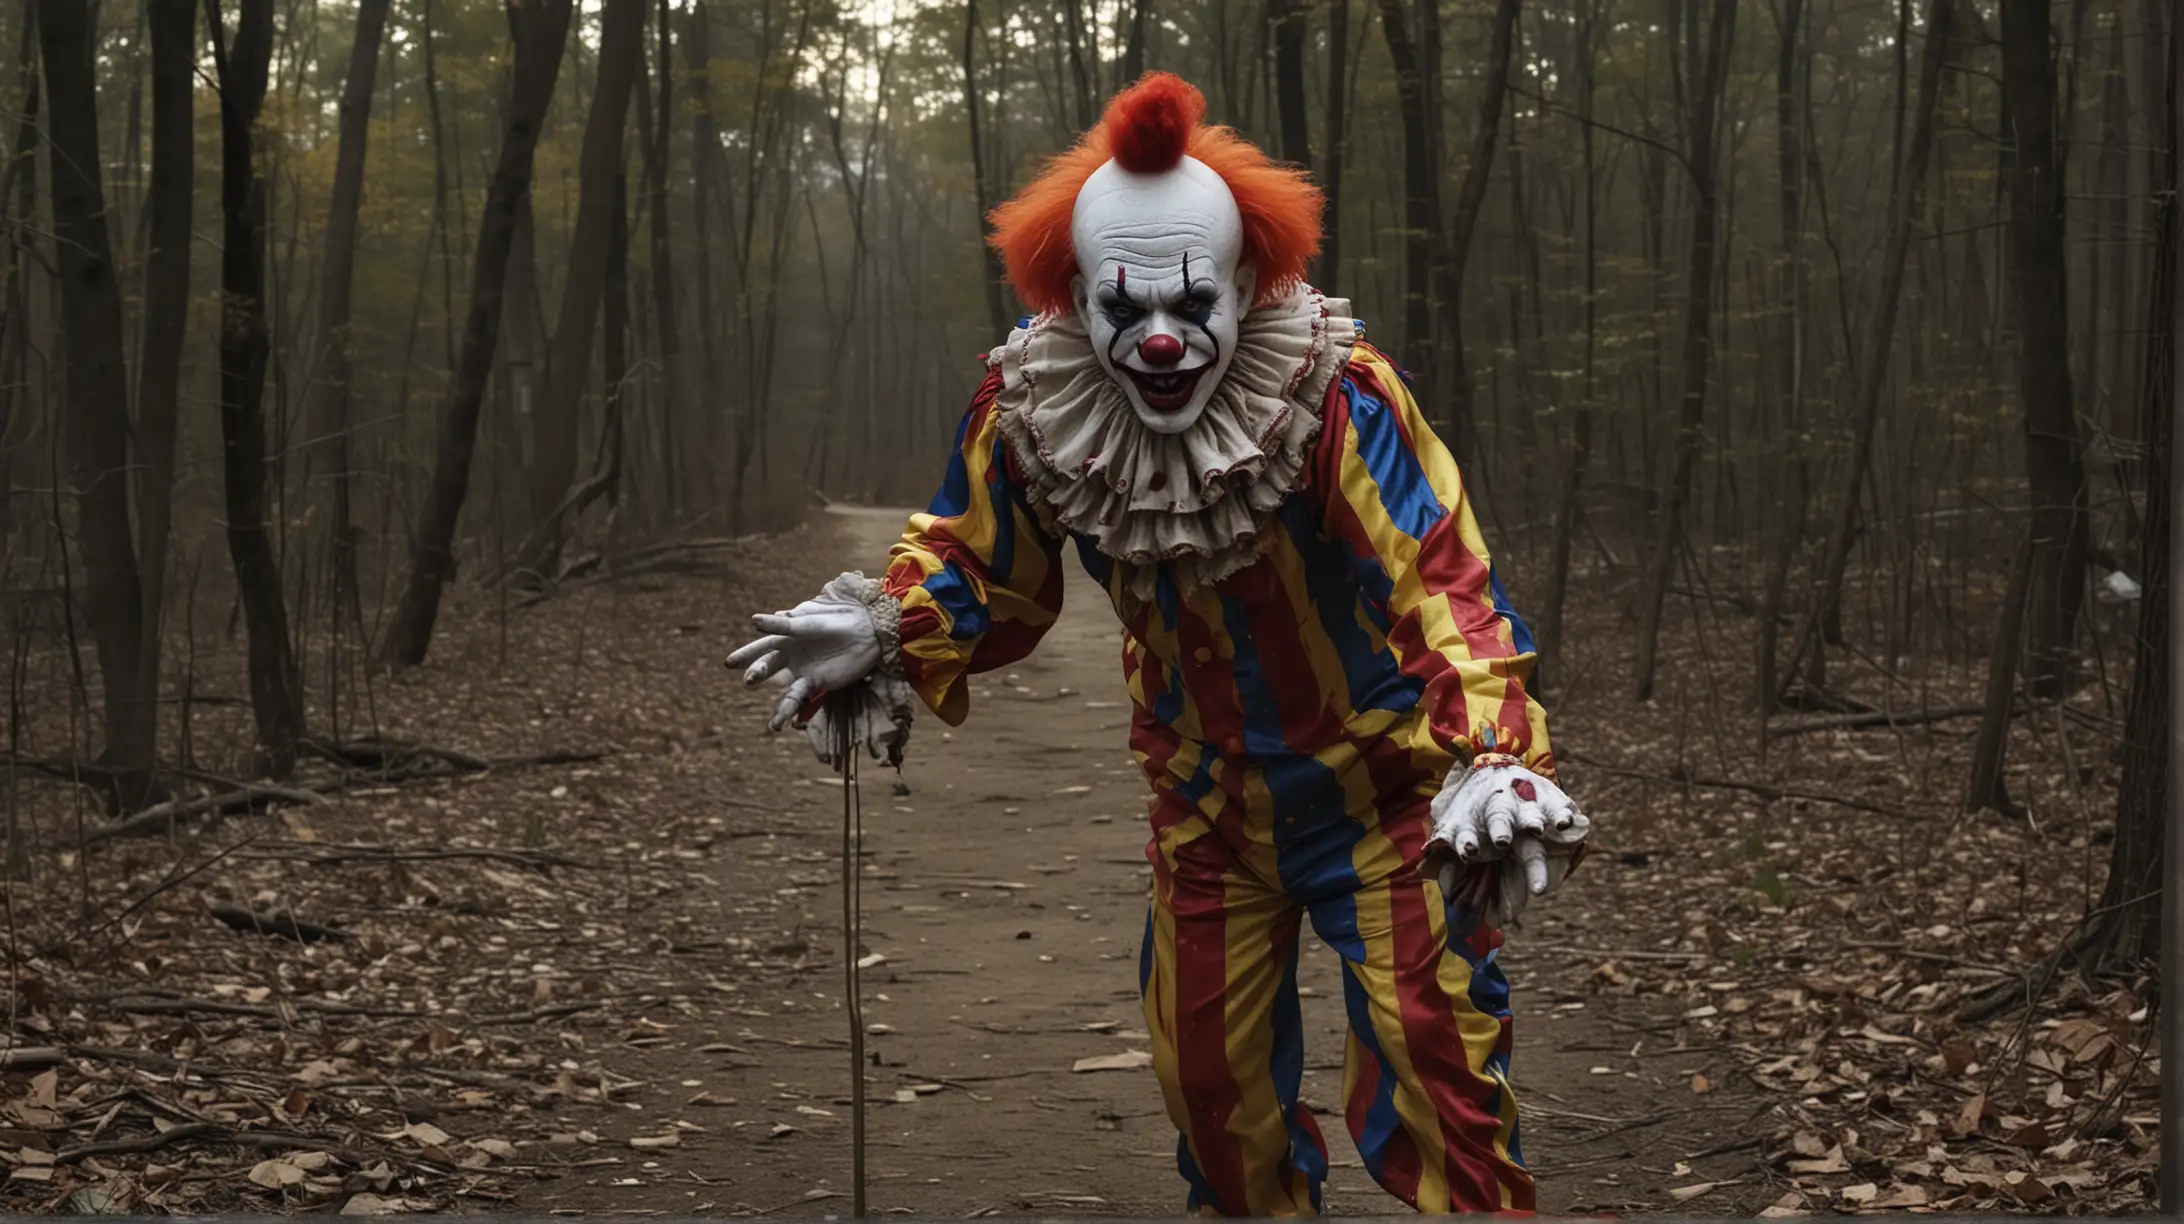 After the show, Chuckles disappeared along with the circus, leaving behind a trail of bodies. The town of Hollow Brook was never the same. The legend of the killer clown became a cautionary tale, a warning to those who dared to laugh in the face of true terror., very clear and 4k quality photo 